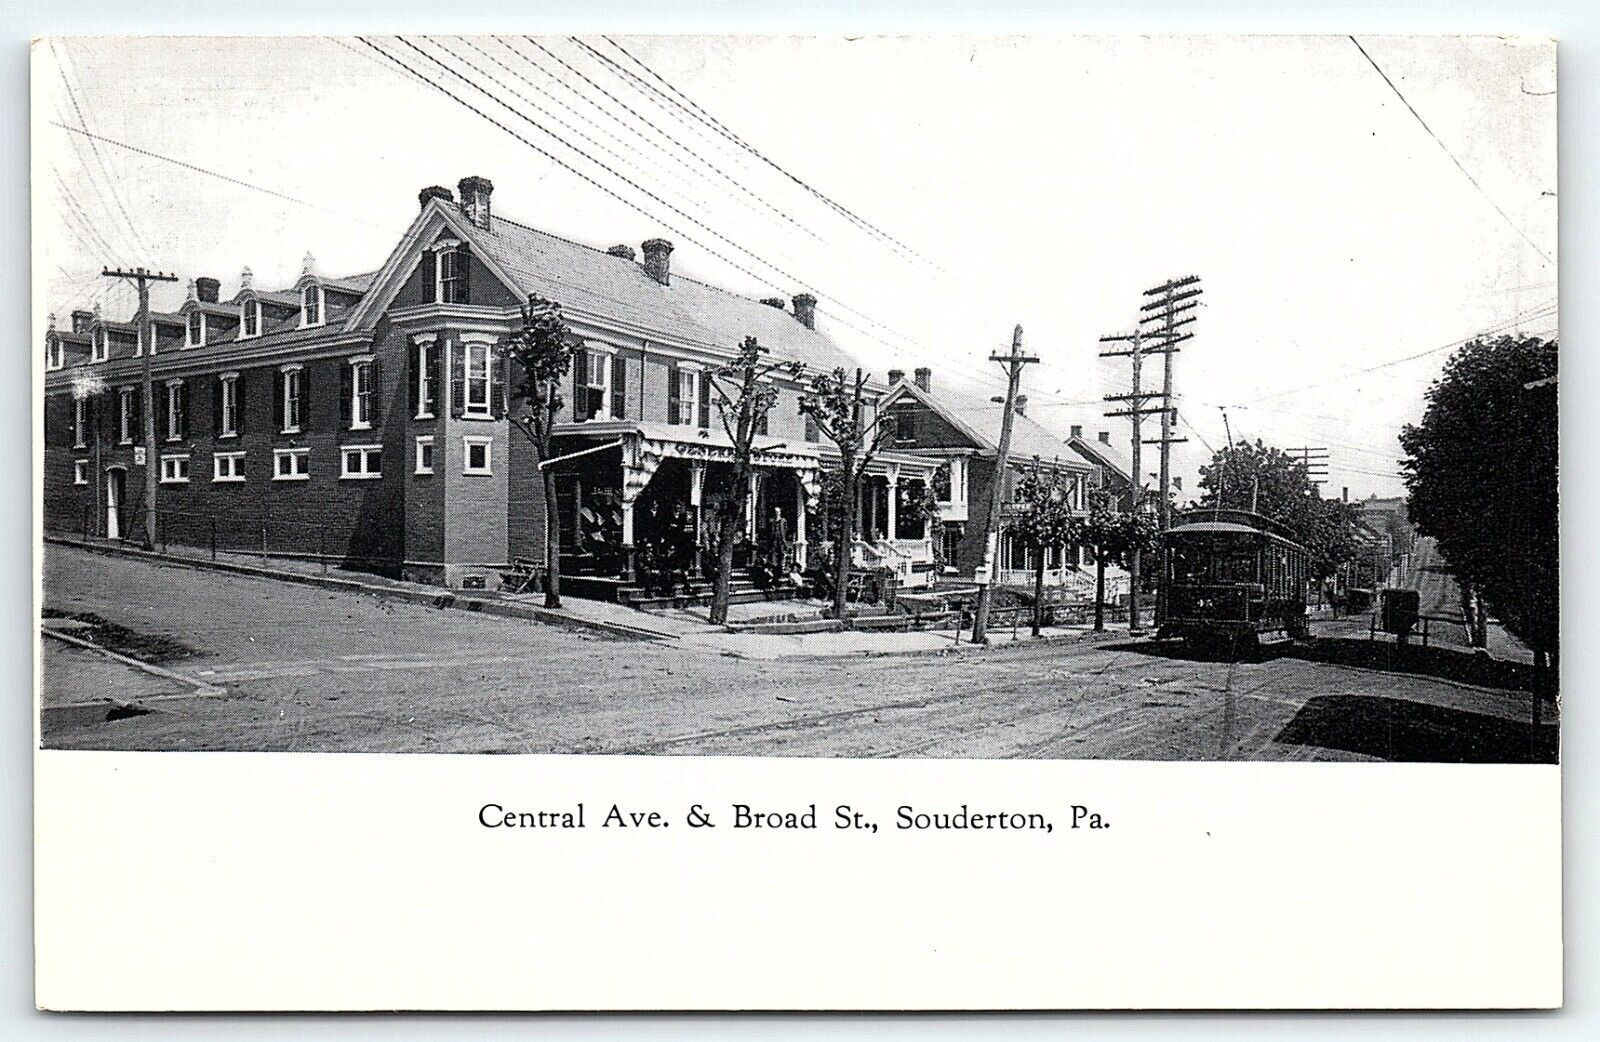 c1915 SOUDERTON PA CENTRAL AVE & BROAD ST. TROLLEY CAR UNPOSTED POSTCARD P4018